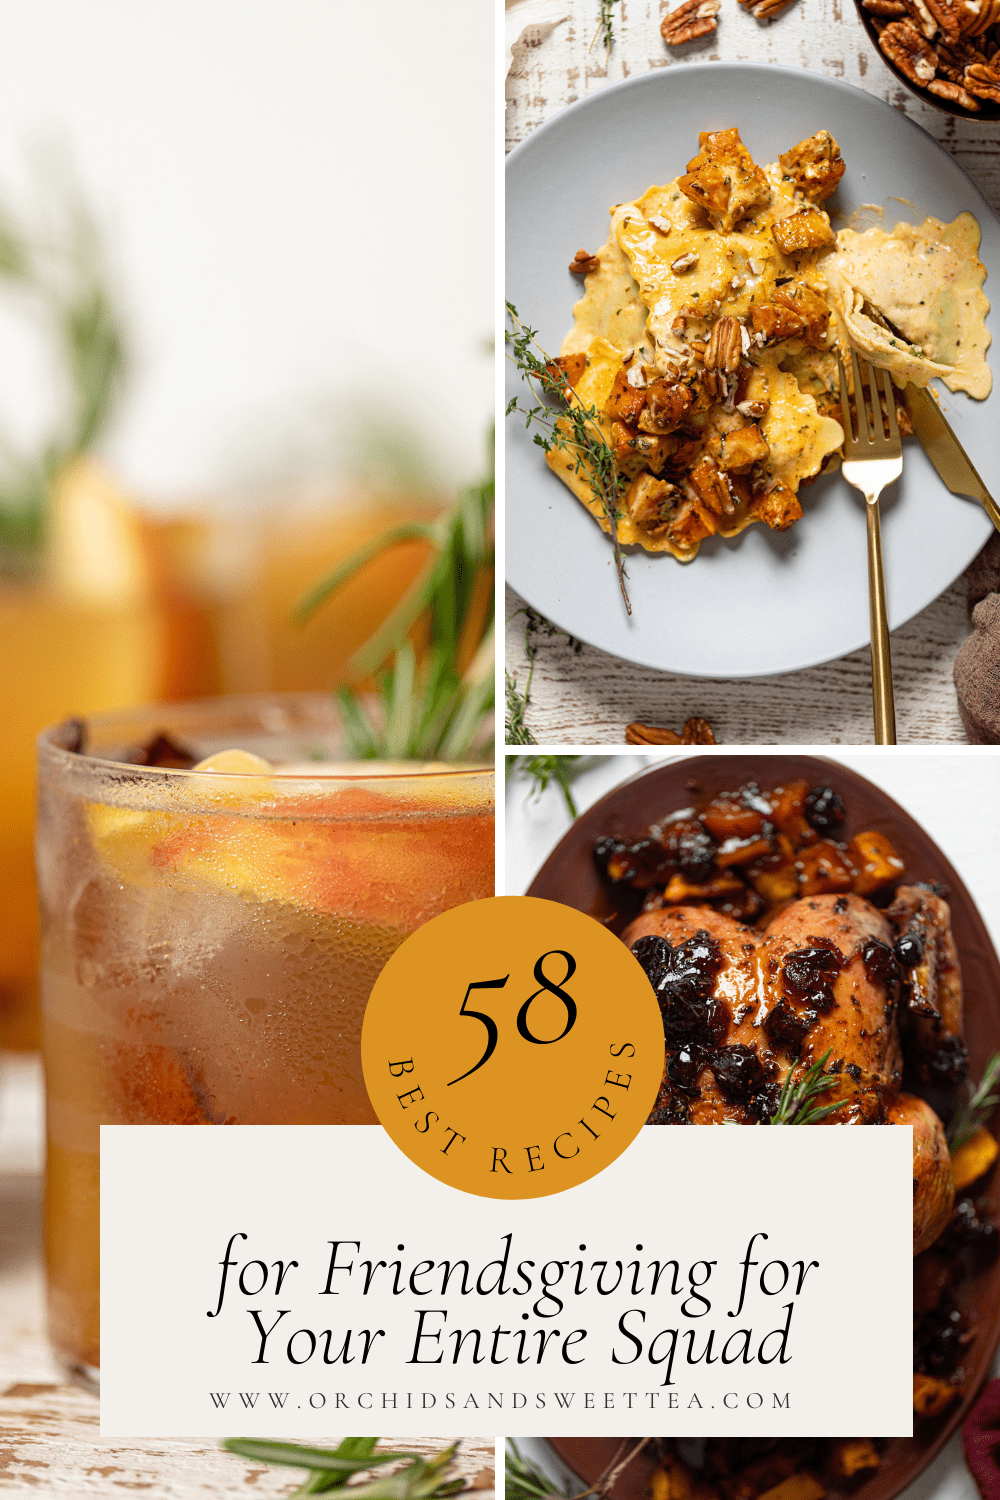 Collage with text: 58 Best Recipes for Friendsgiving for Your Entire Squad